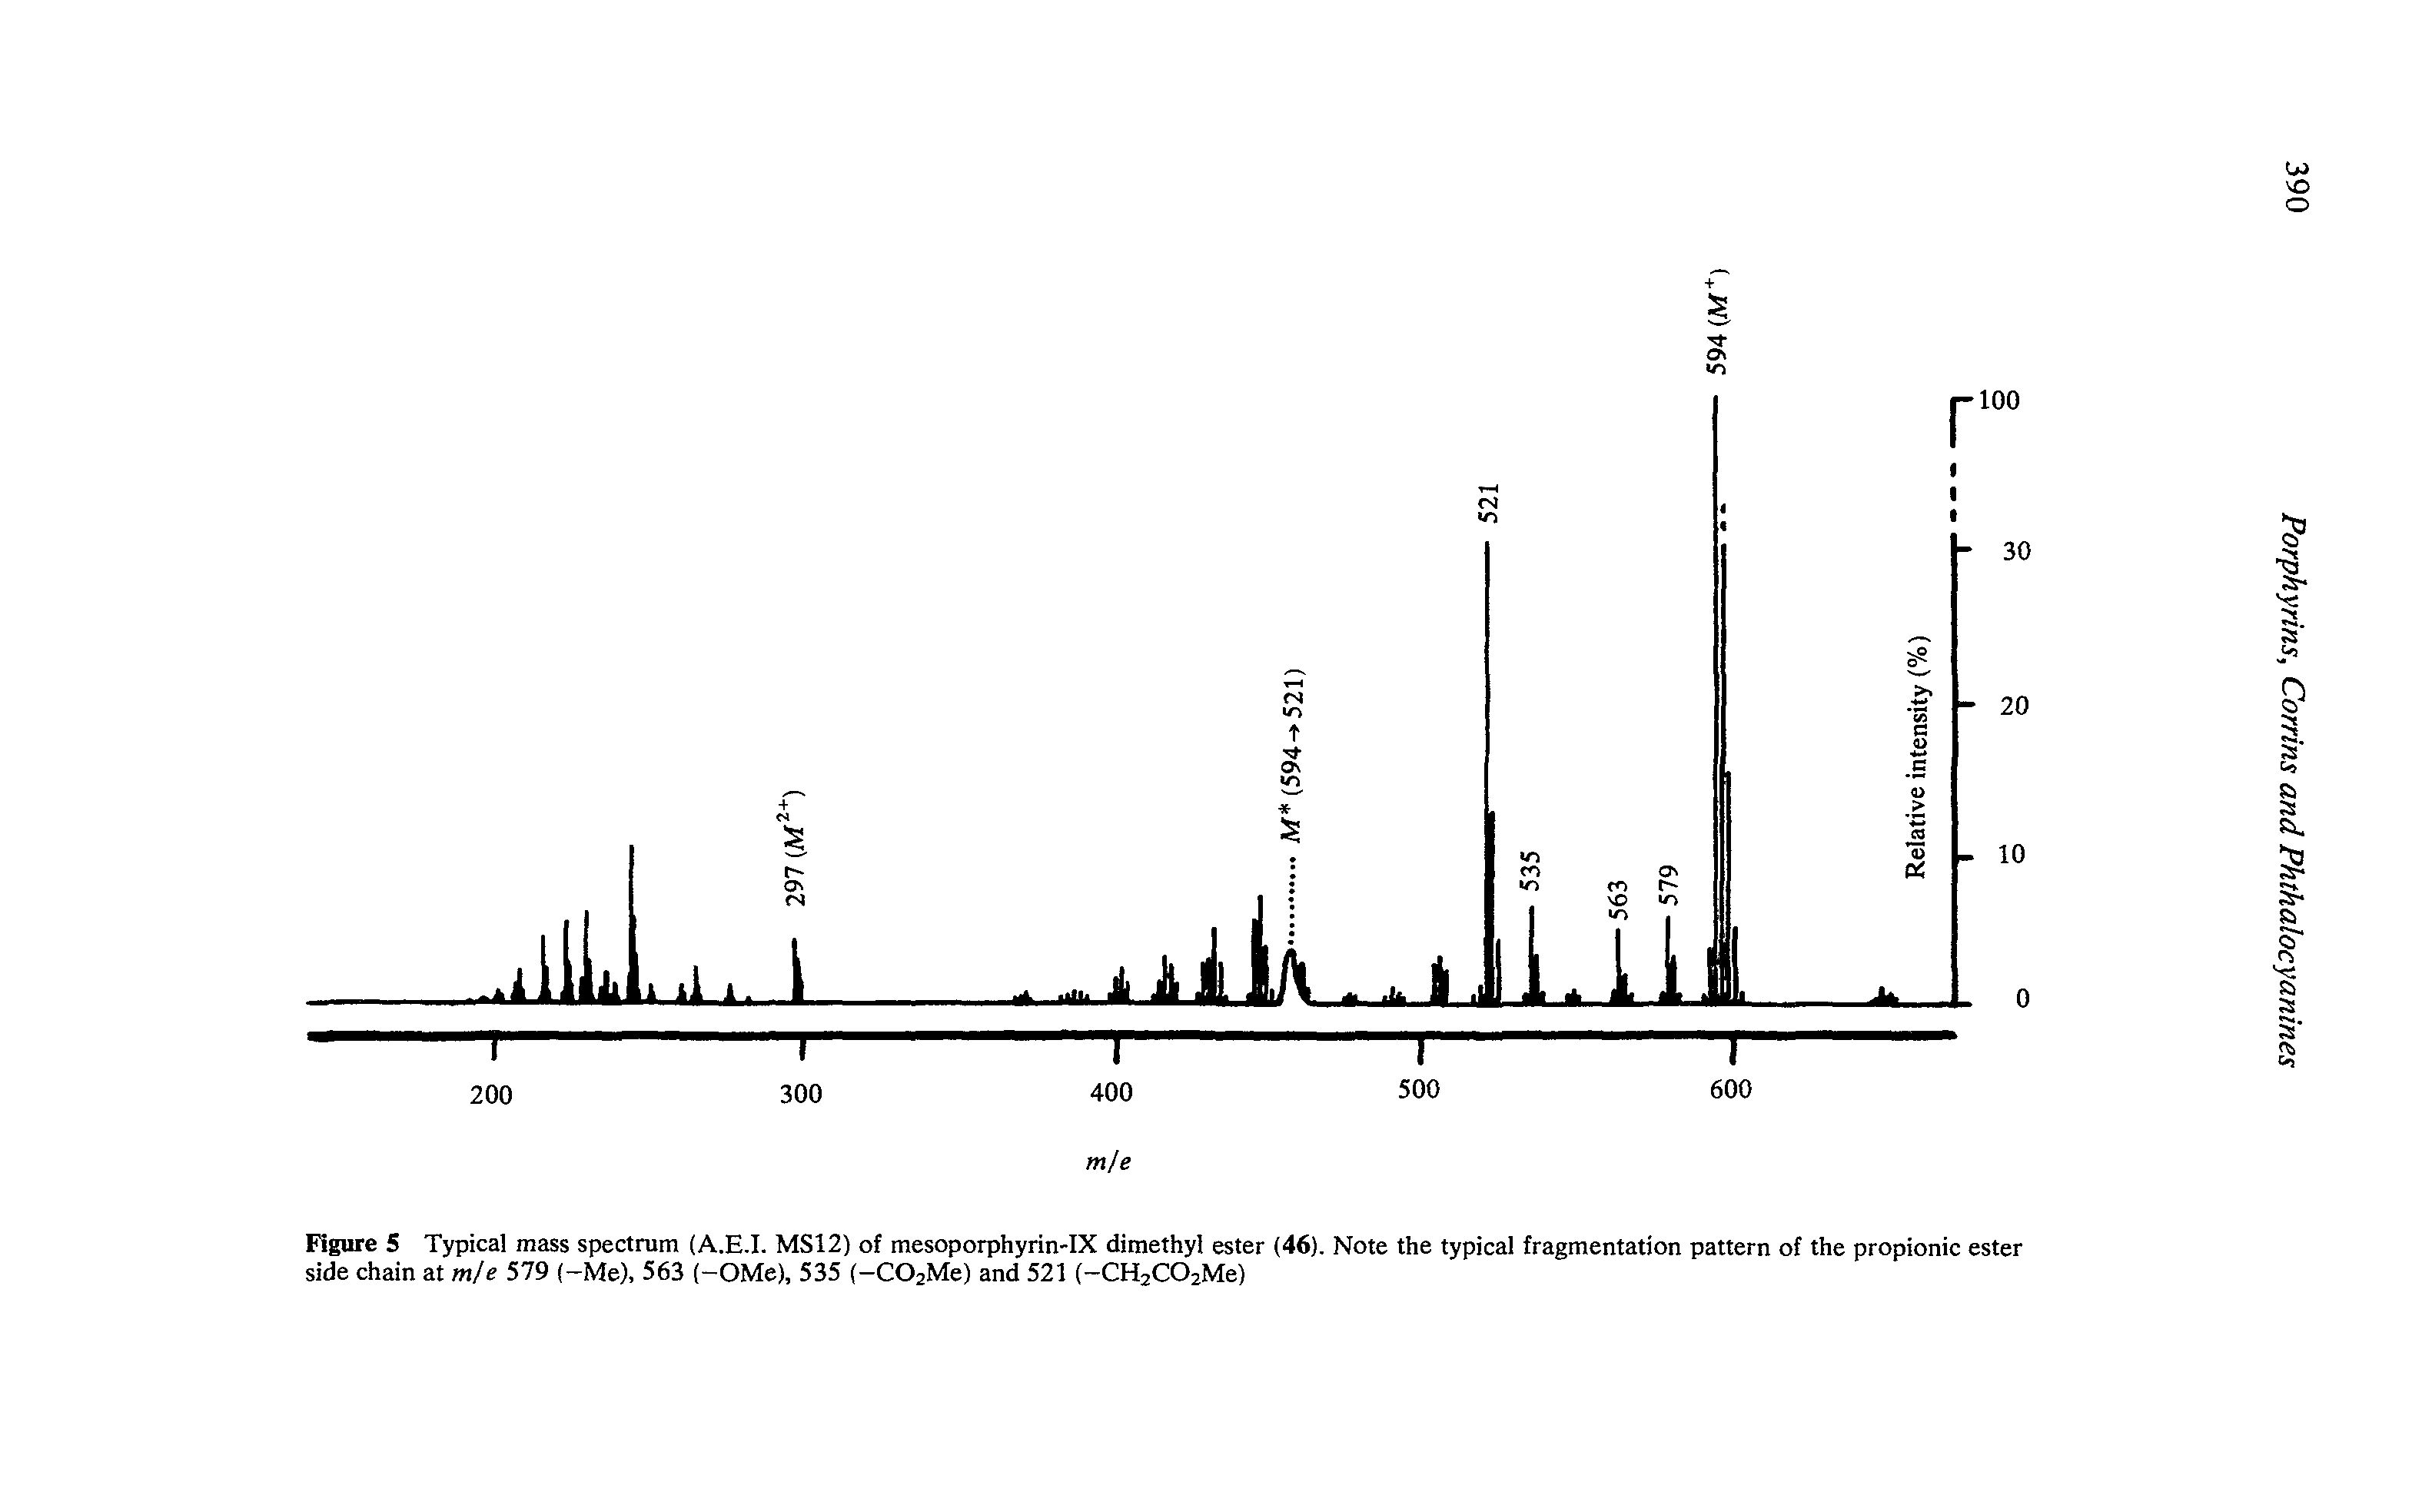 Figure 5 Typical mass spectrum (A.H.I. MS12) of mesoporphyrin-IX dimethyl ester (46). Note the typical fragmentation pattern of the propionic ester side chain at m/e 579 (-Me), 563 (-OMe), 535 (-C02Me) and 521 (-CH2C02Me)...